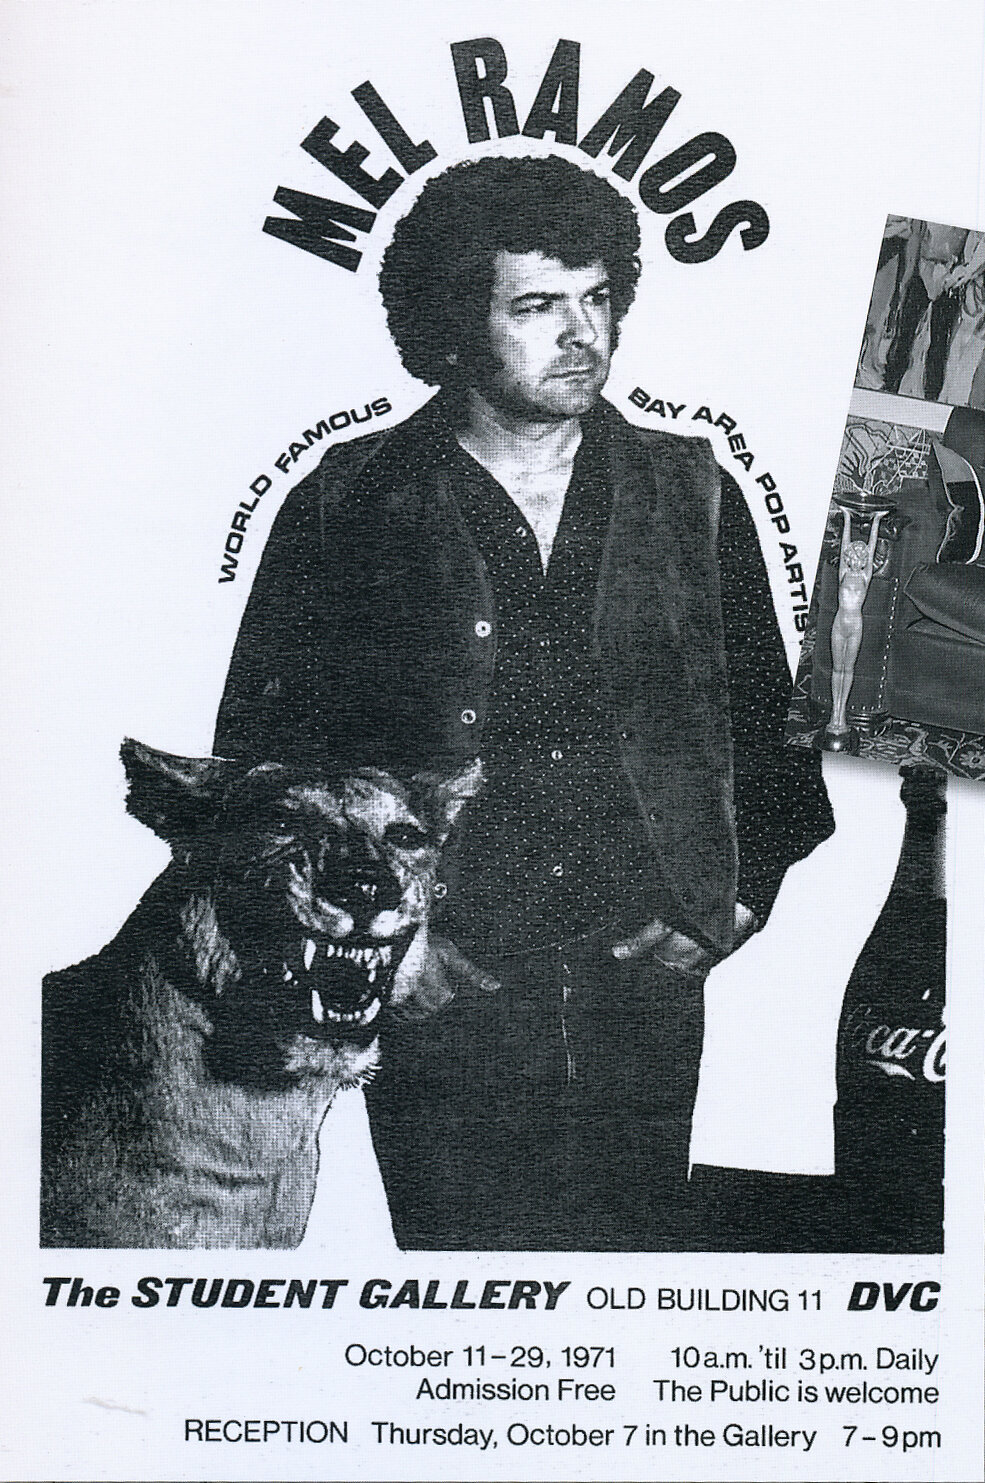 Exhibition poster for The Student Gallery, 1971.